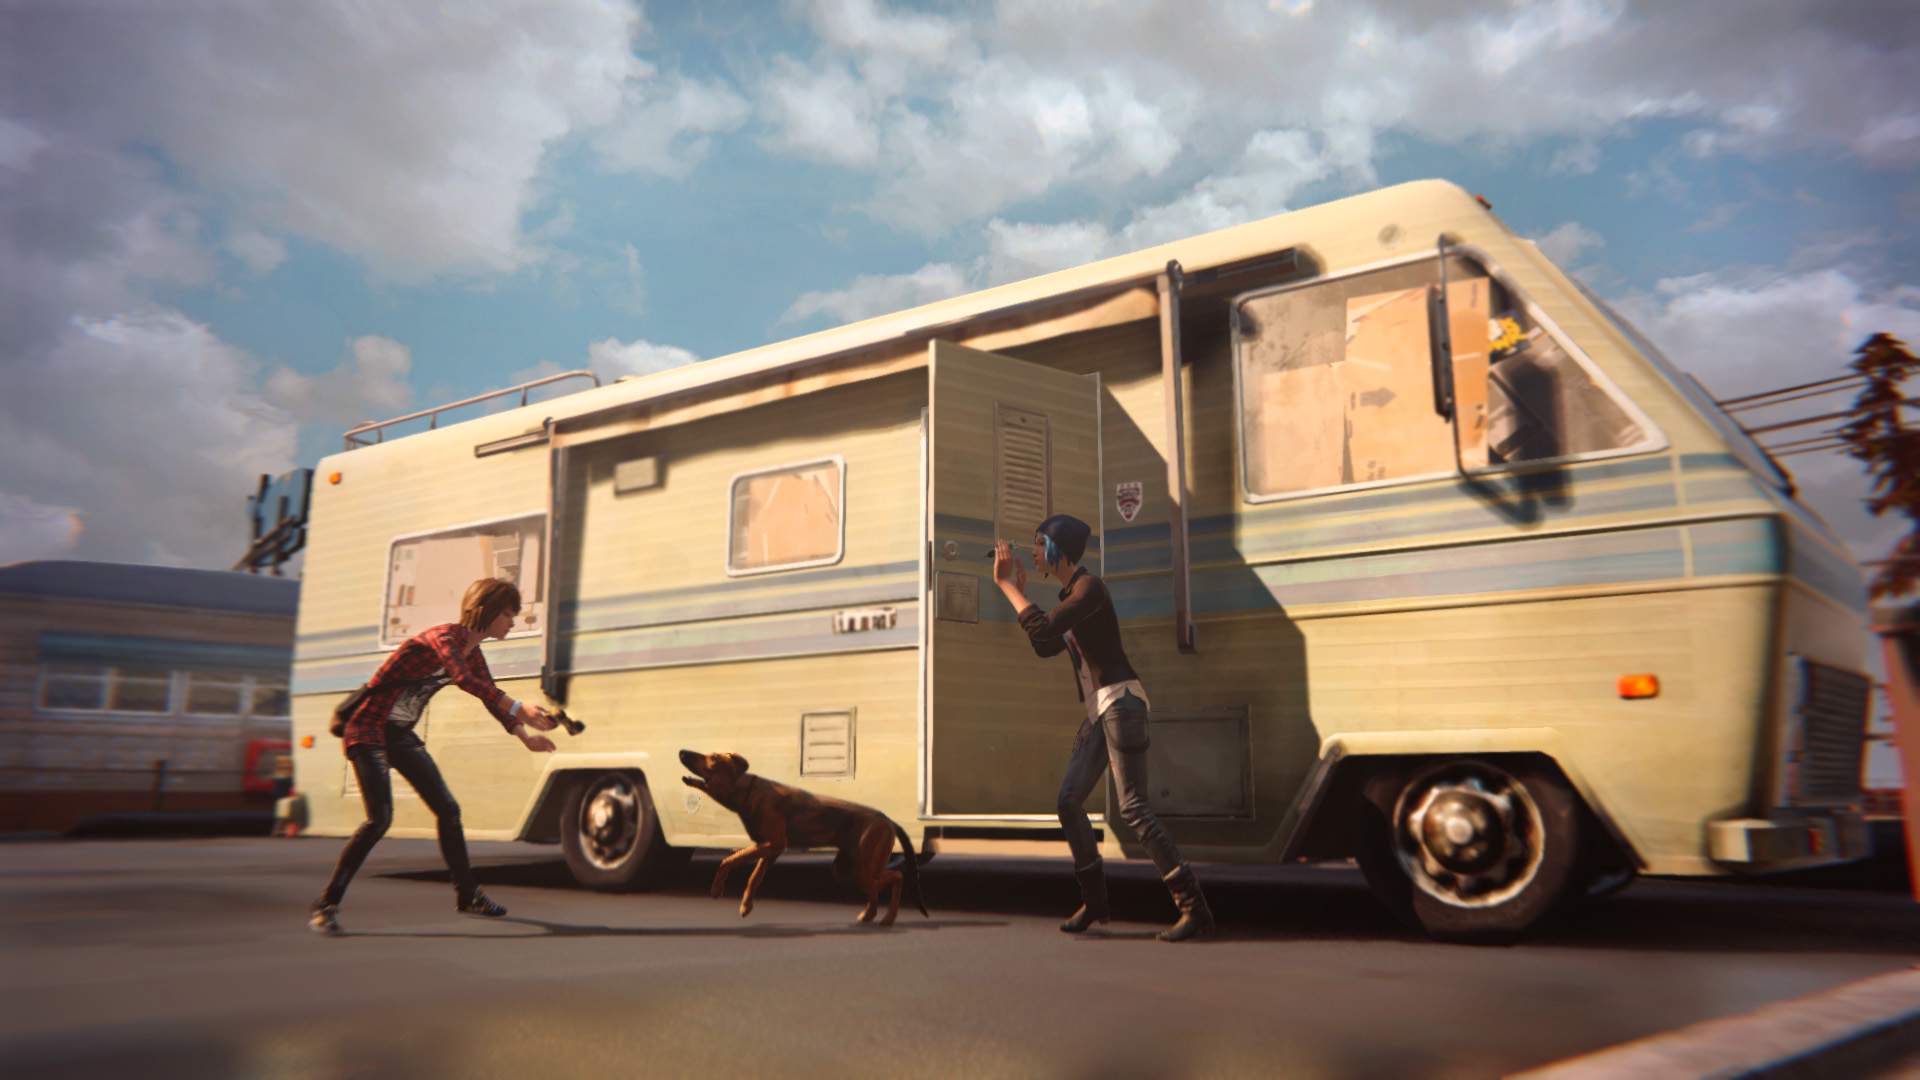 In front of Frank's RV, Max and Chloe attempt to calm down Frank's dog, Pompidou, before it can raise the alarm.